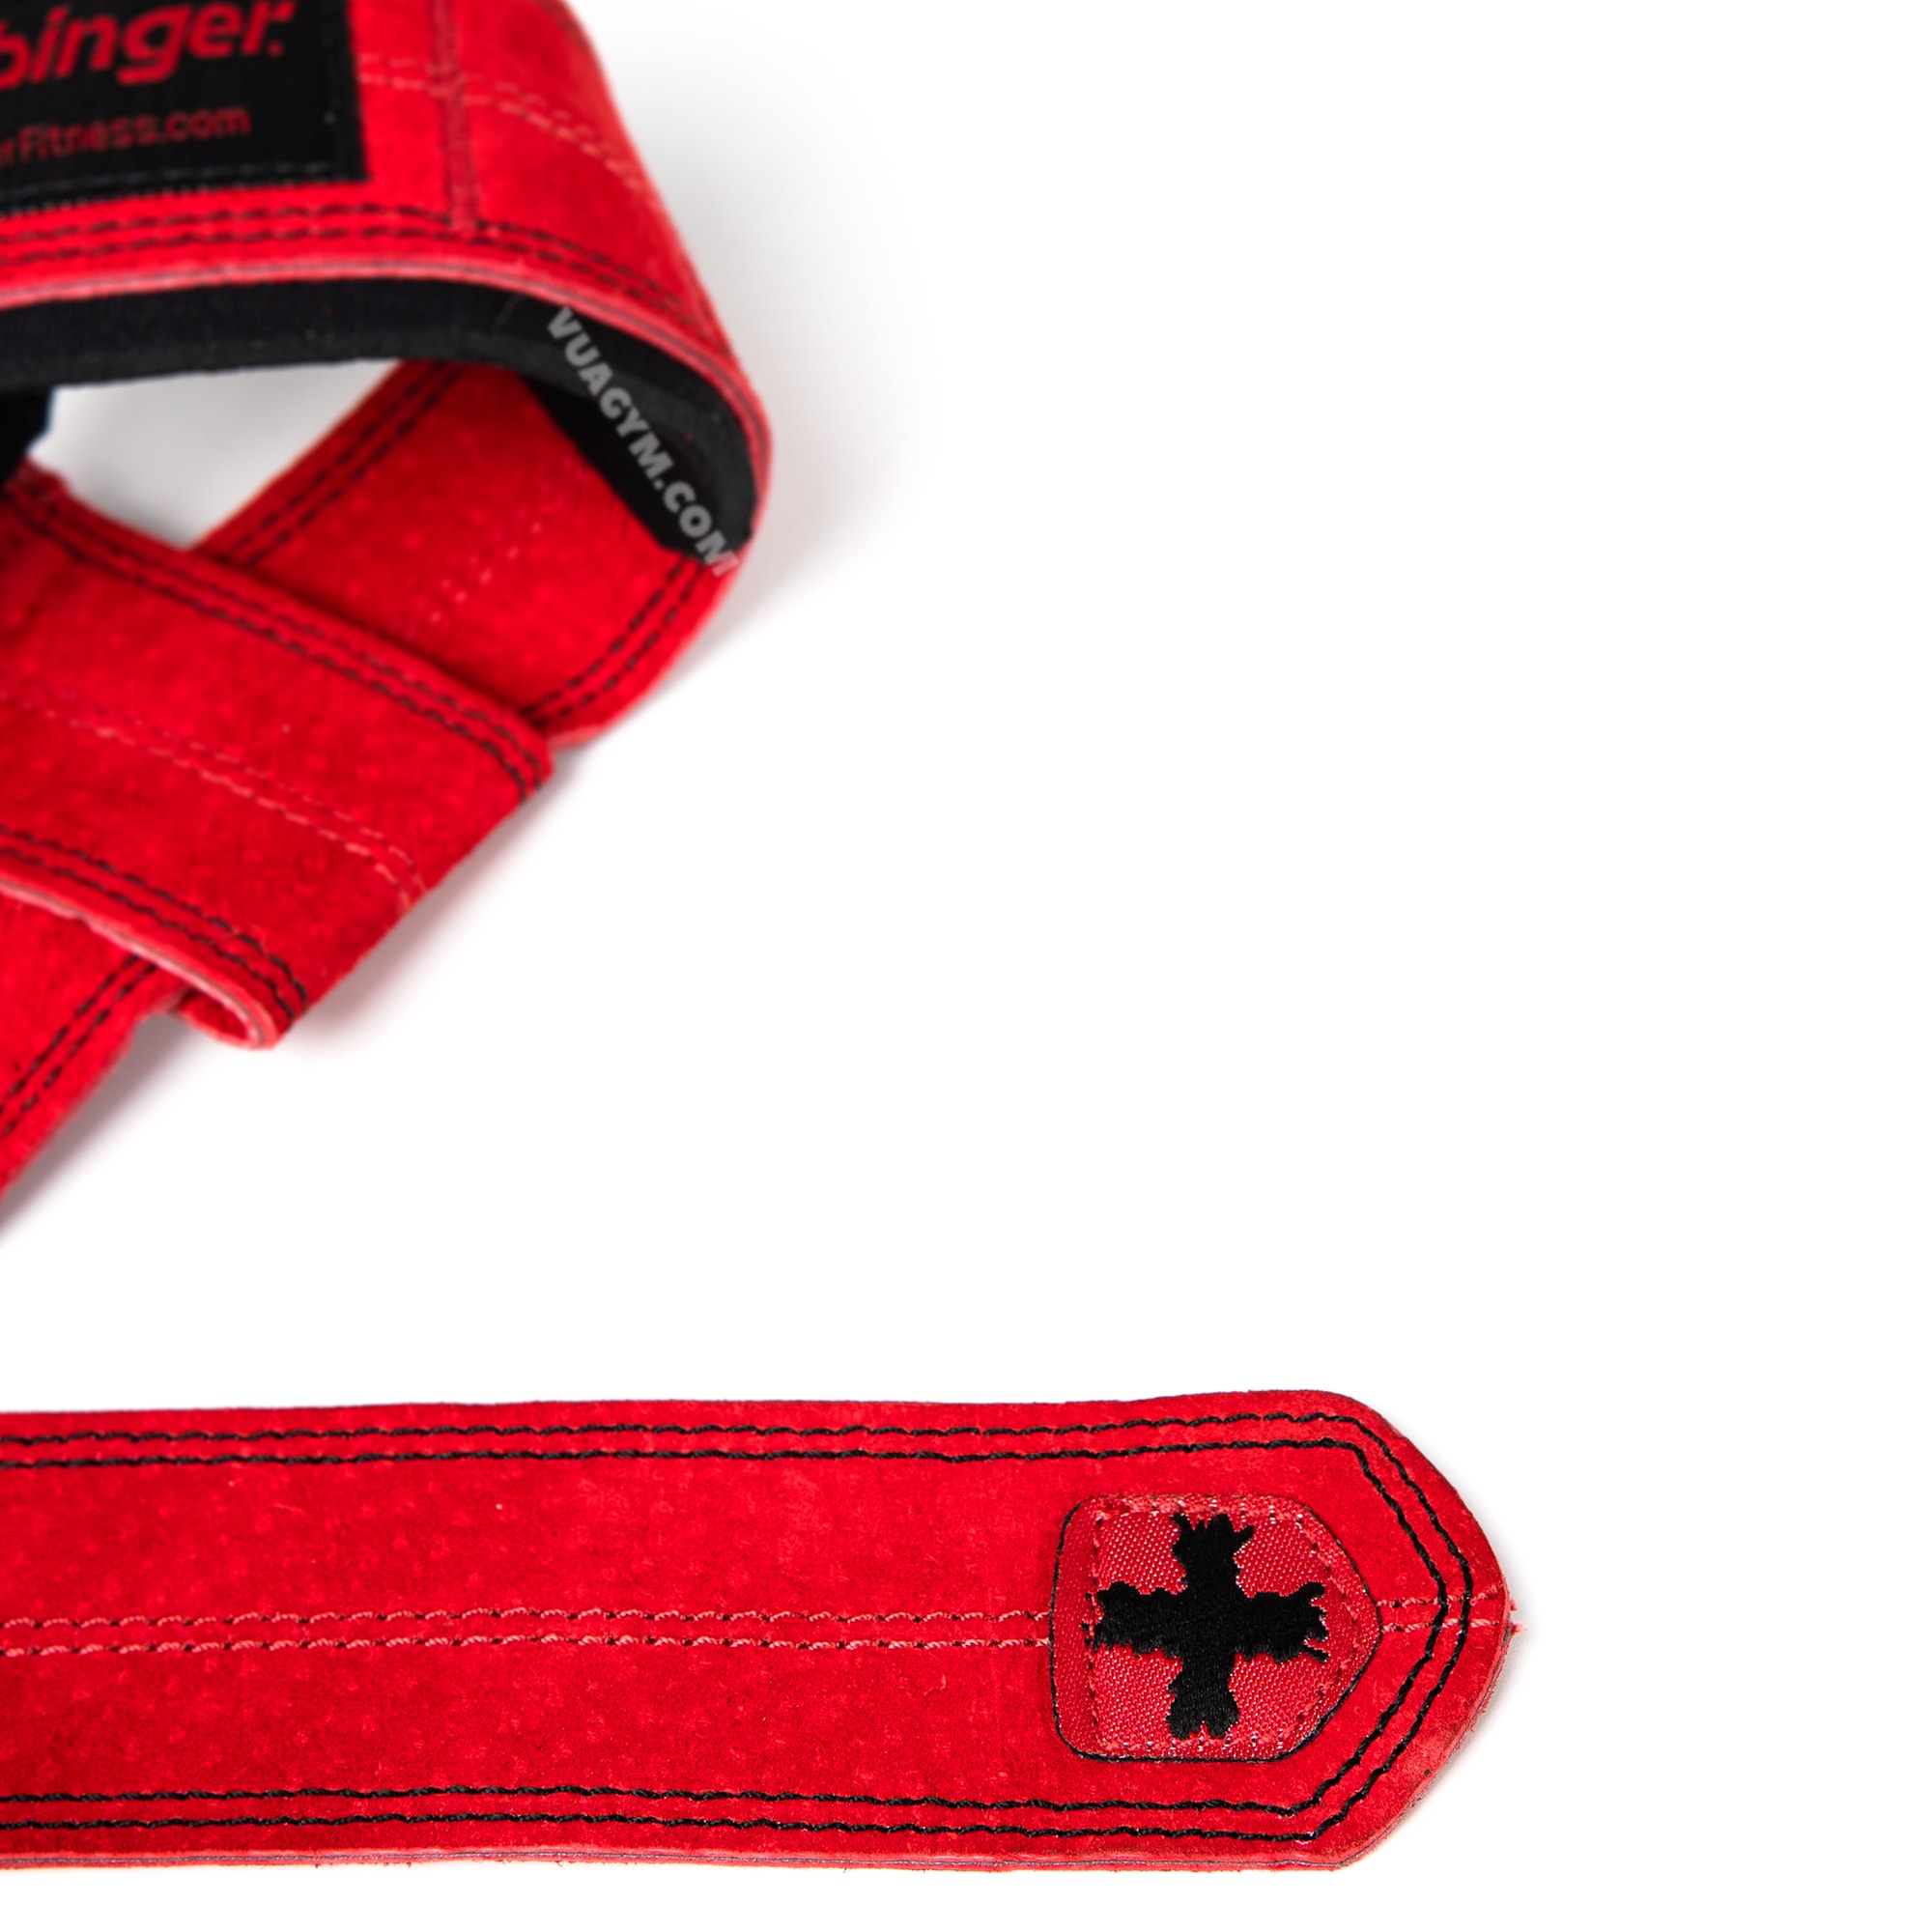 Anime Wrist Wraps for Strength Athletes, Powerlifters & Crossfit who love  Anime